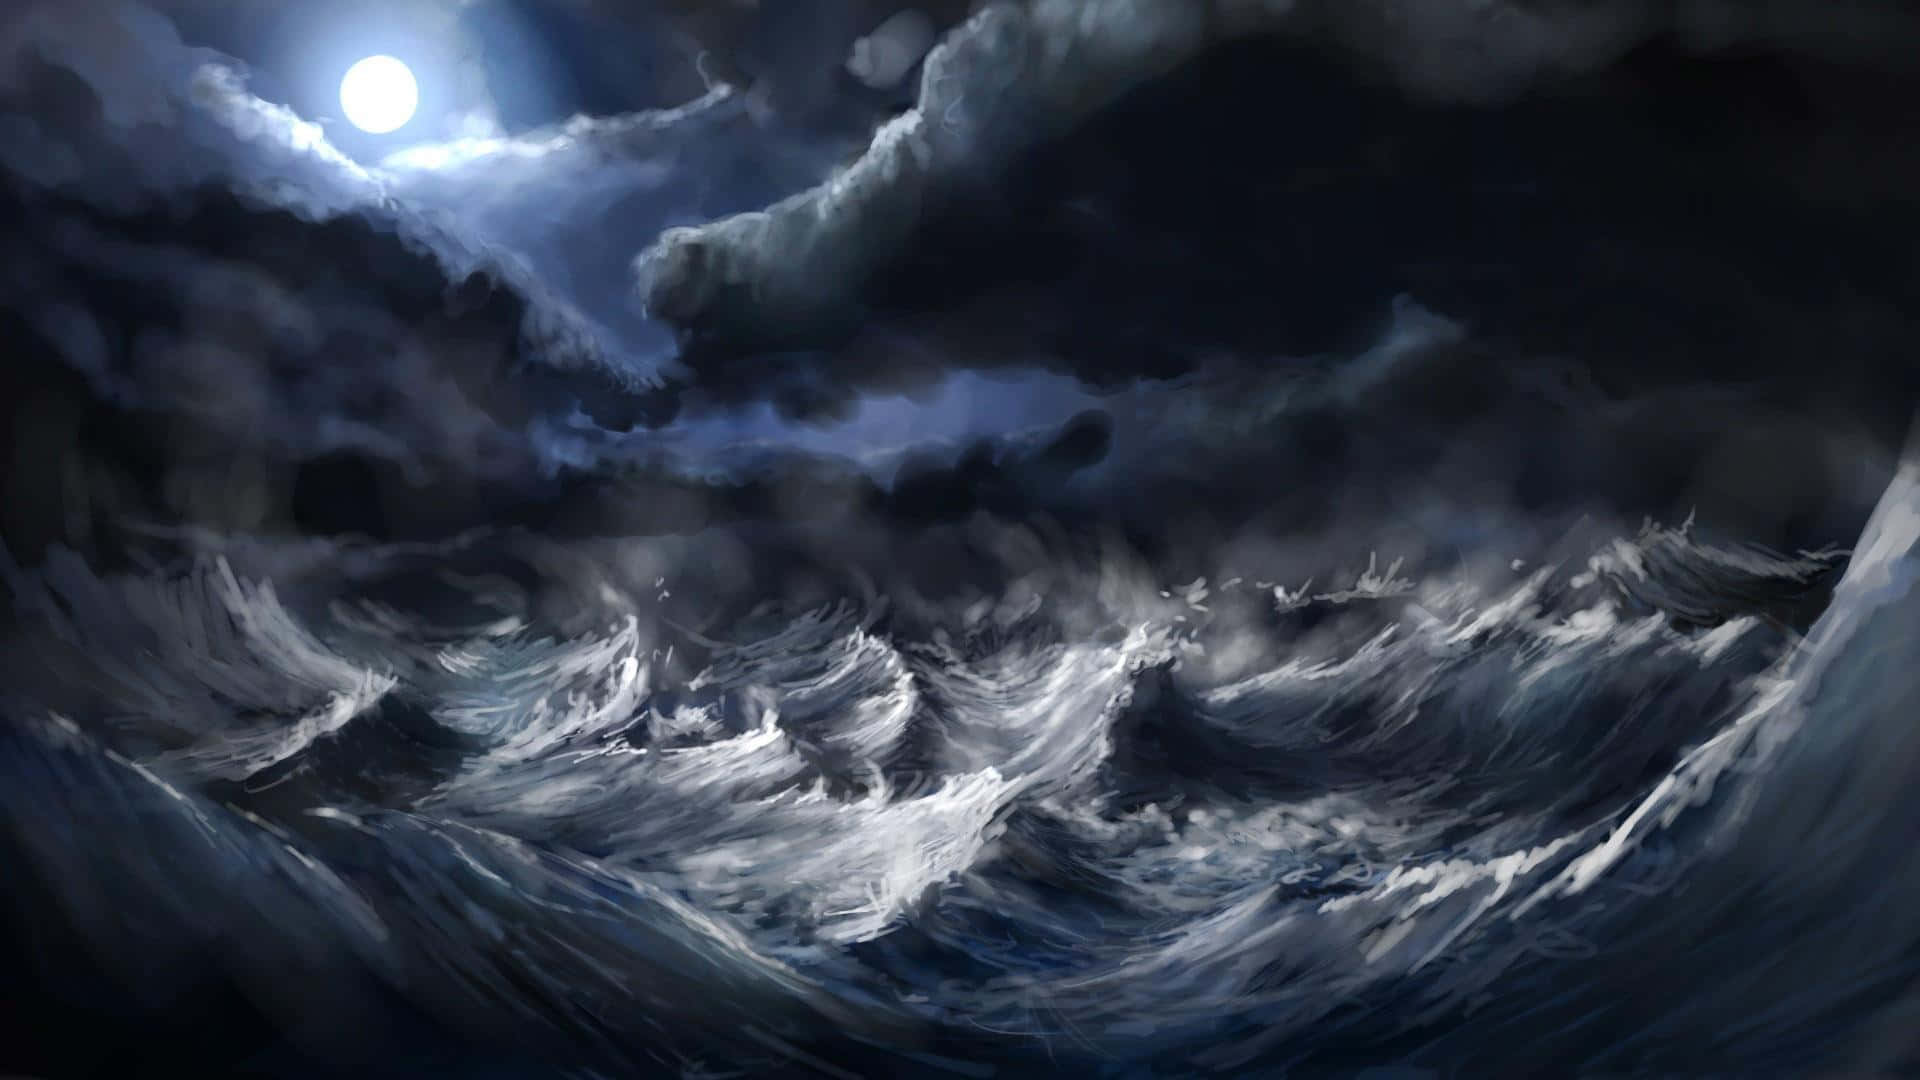 Large Waves from a Powerful Ocean Storm Wallpaper